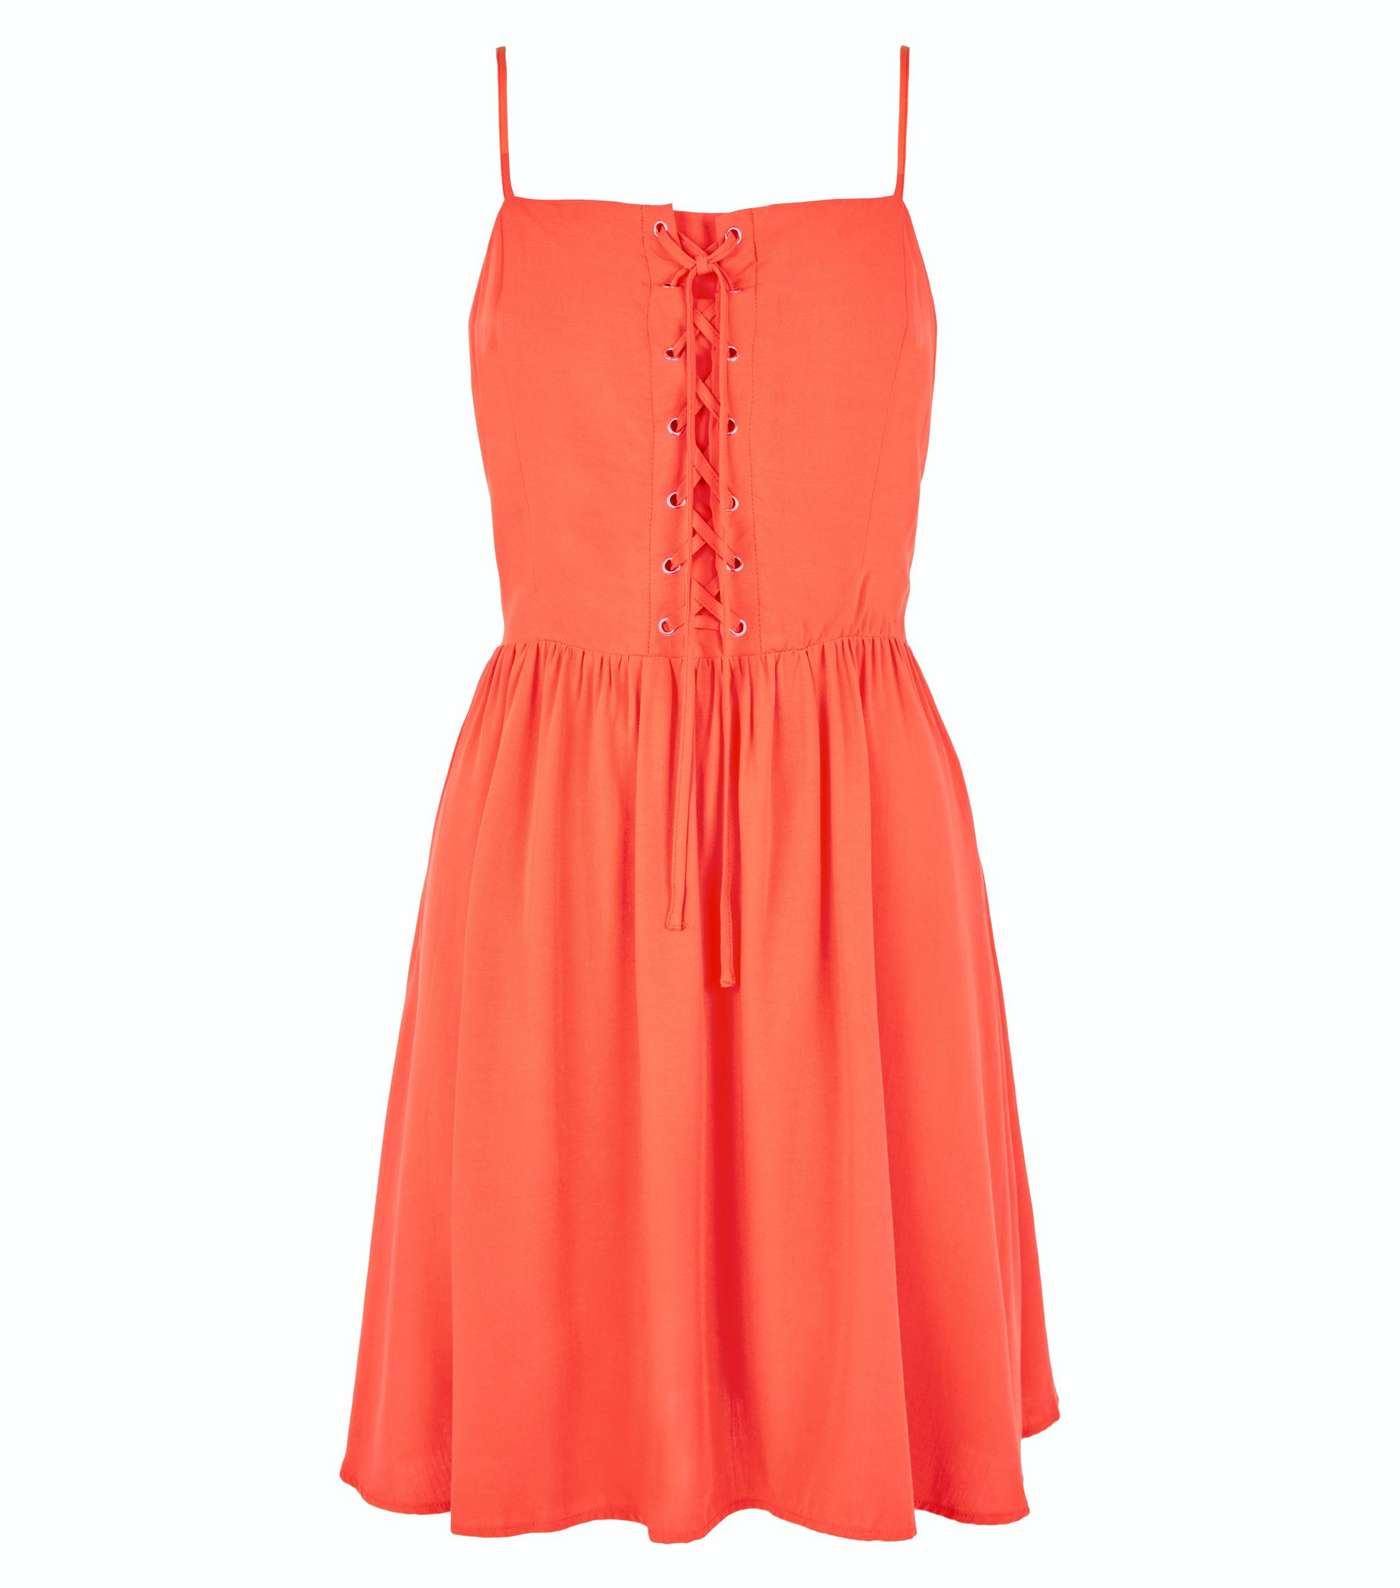 Petite Red Lace Up Skater Dress Image 4